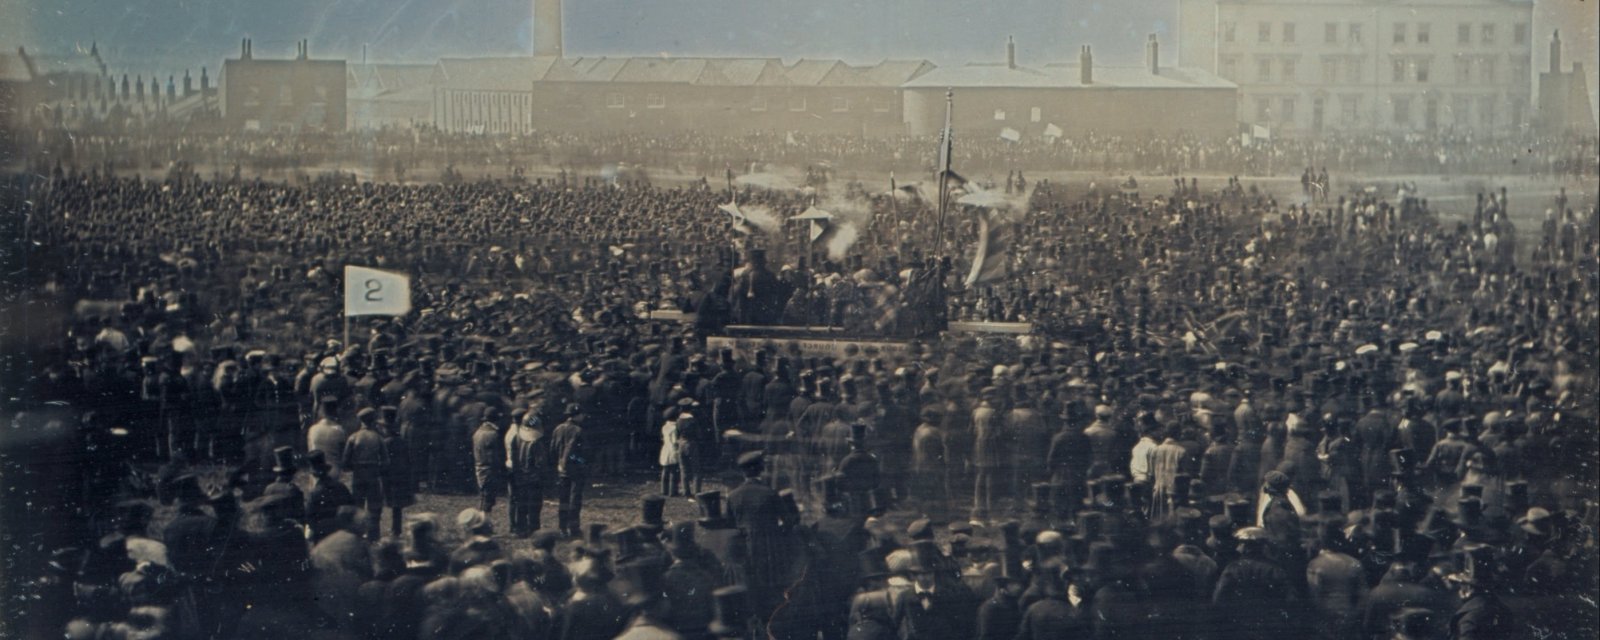 Photograph of the Great Chartist Meeting on Kennington Common, London in 1848 (public domain) Image By William Edward Kilburn.